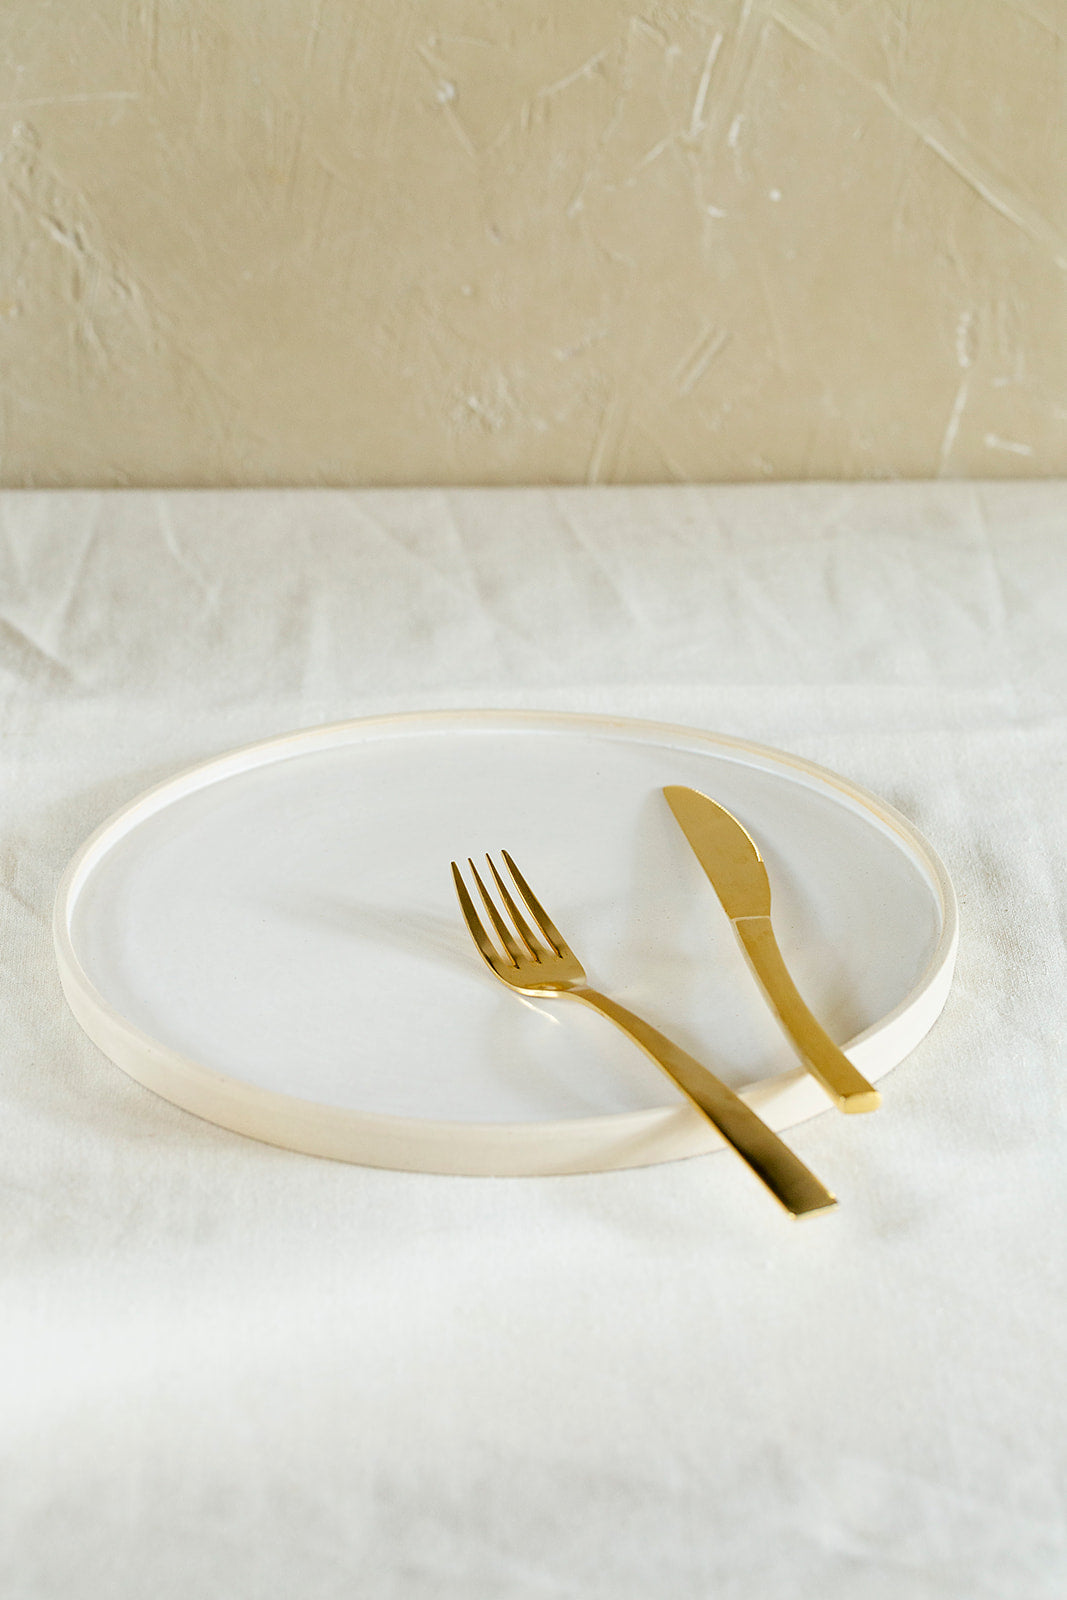 White main course plate